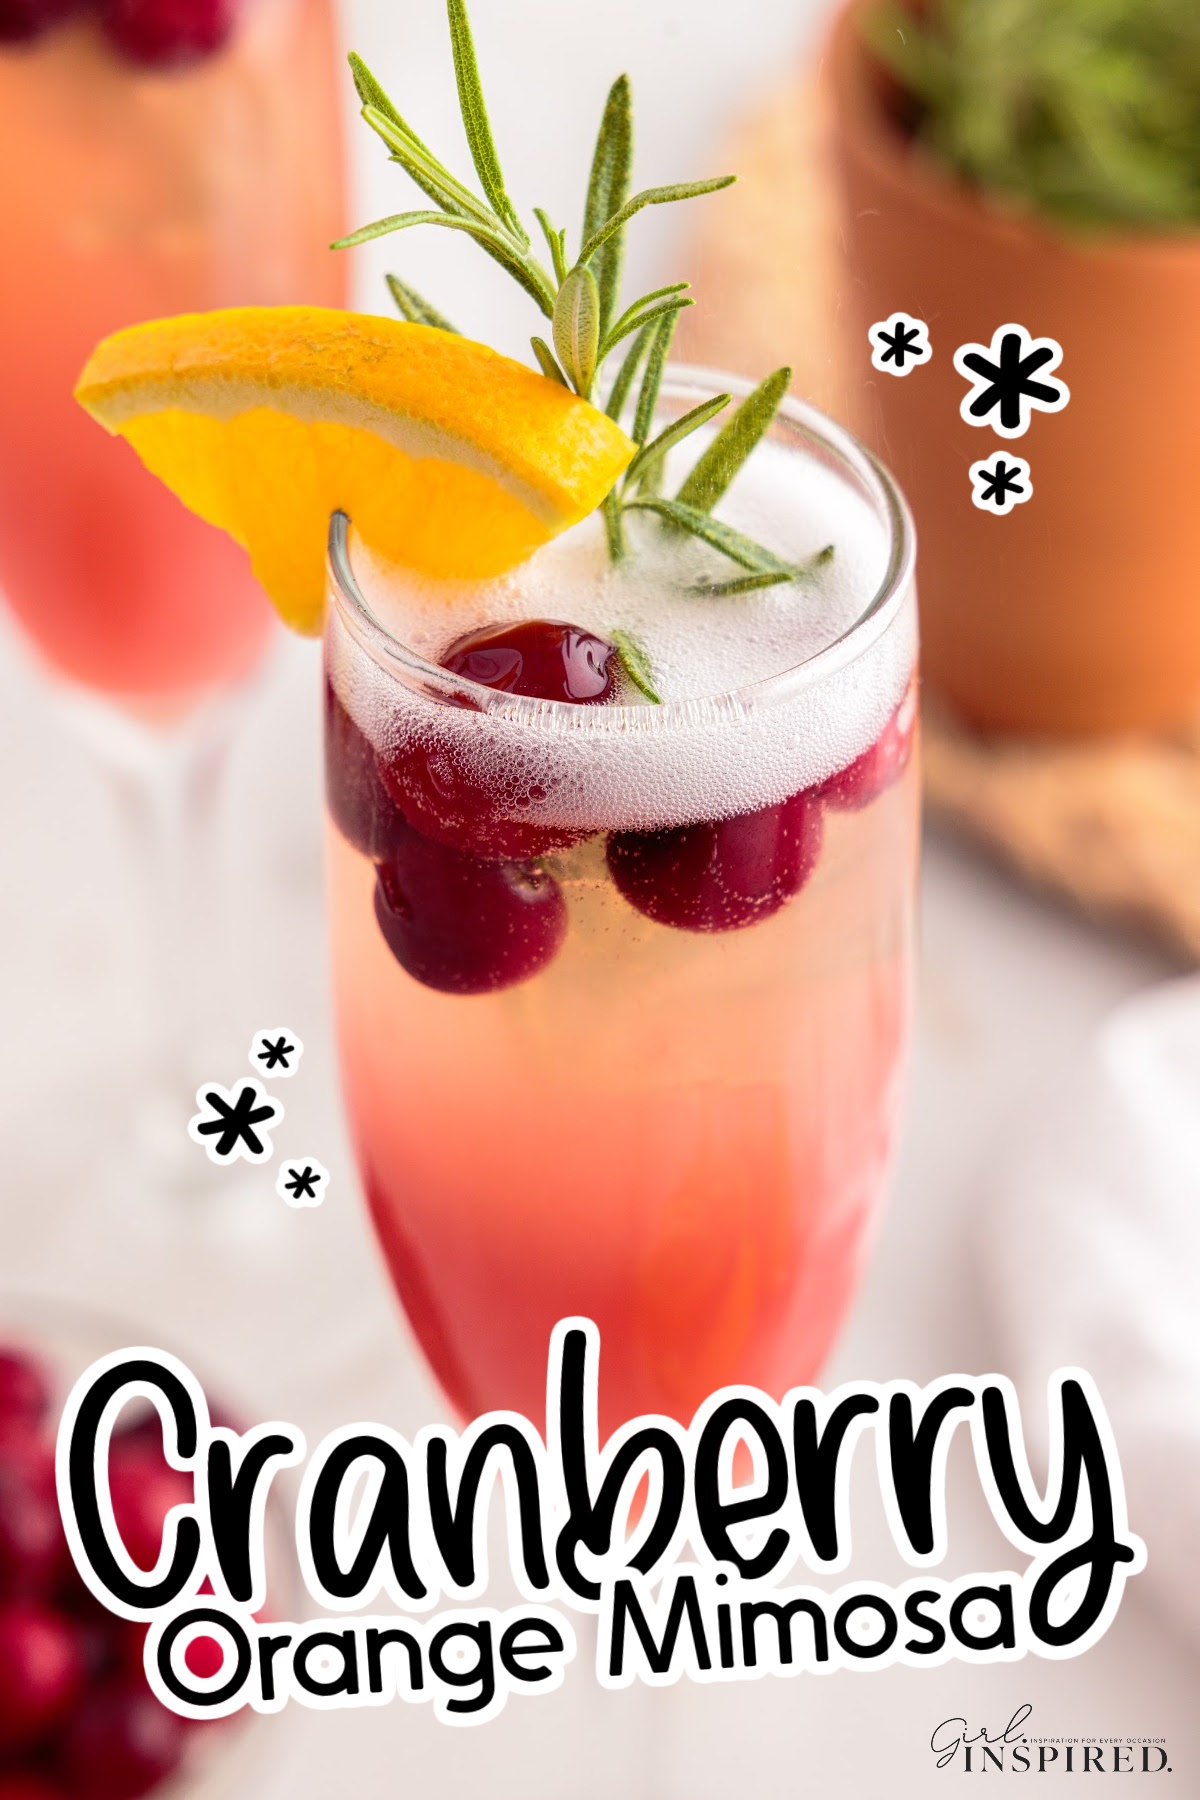 Close up of a Cranberry Orange Mimosa with text overlay.